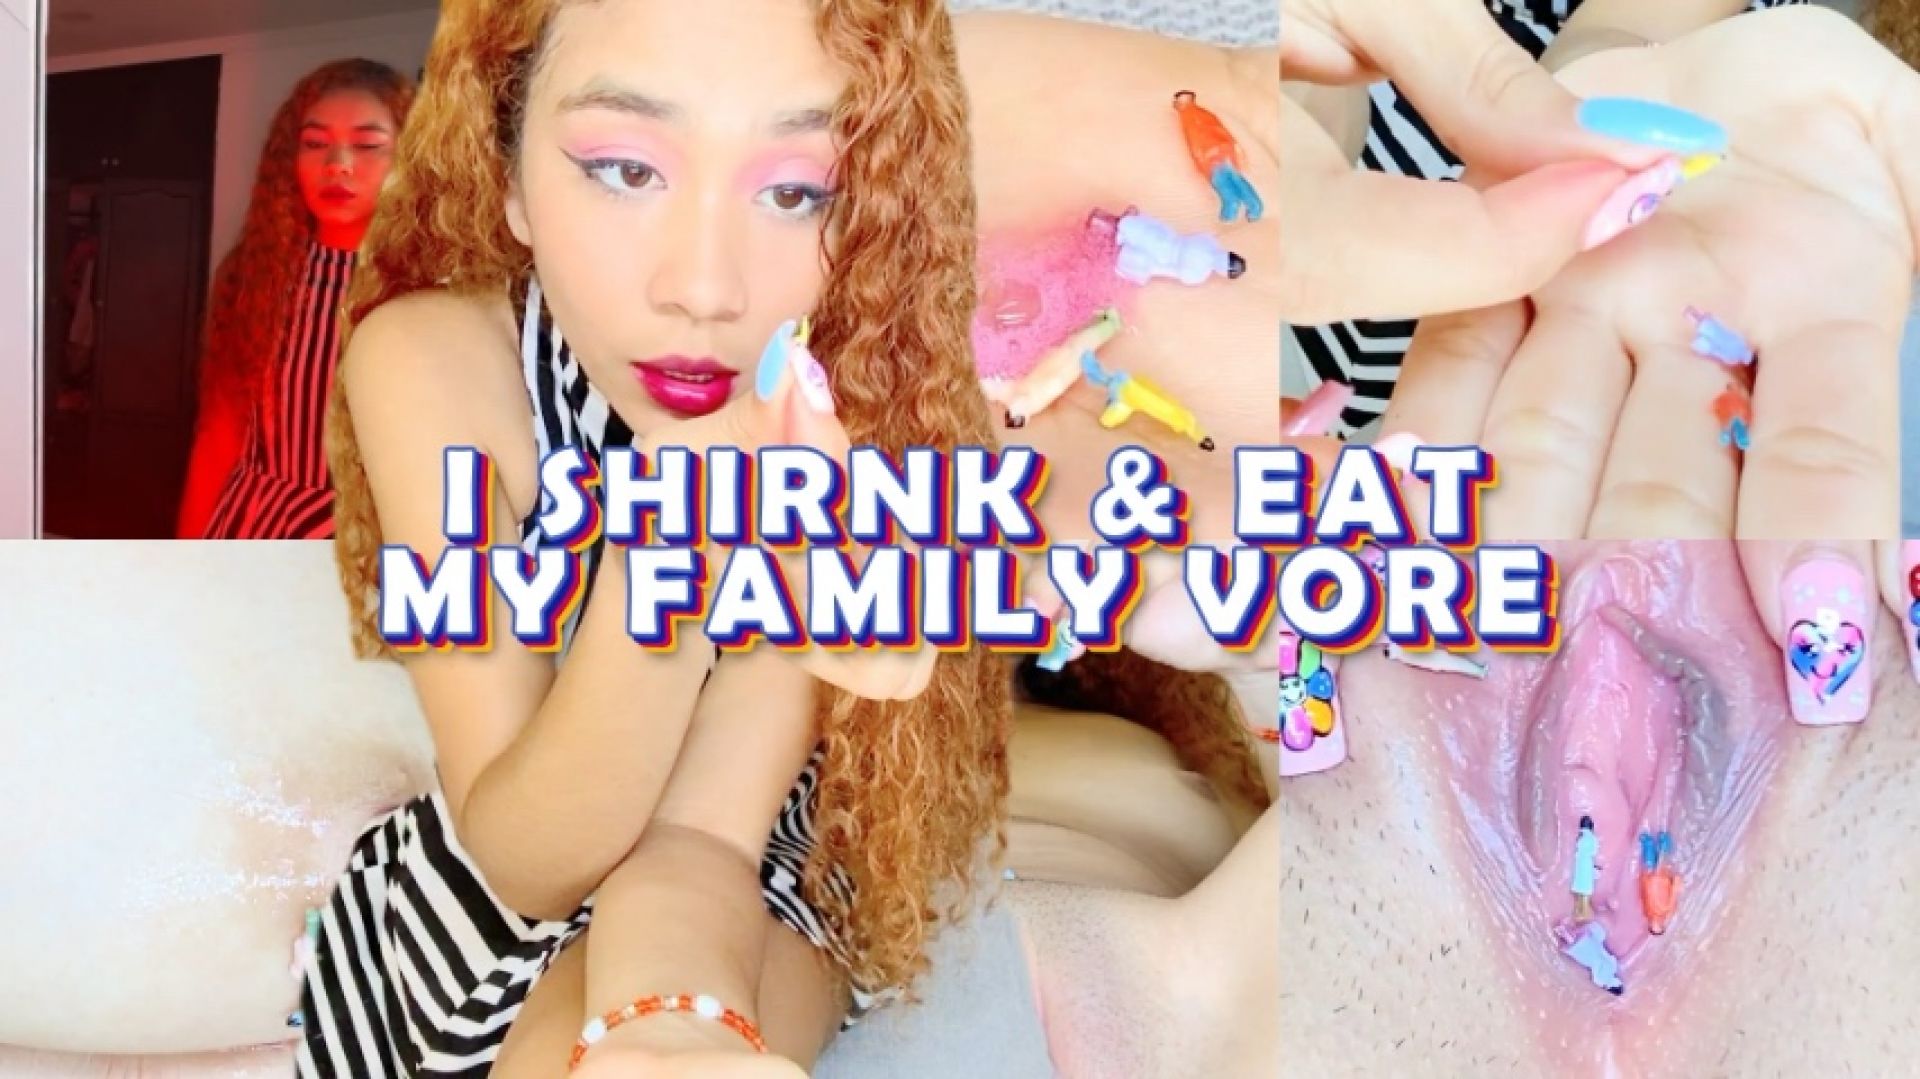 leaked I SHRINK AND EAT MY FAMILY VORE thumbnail